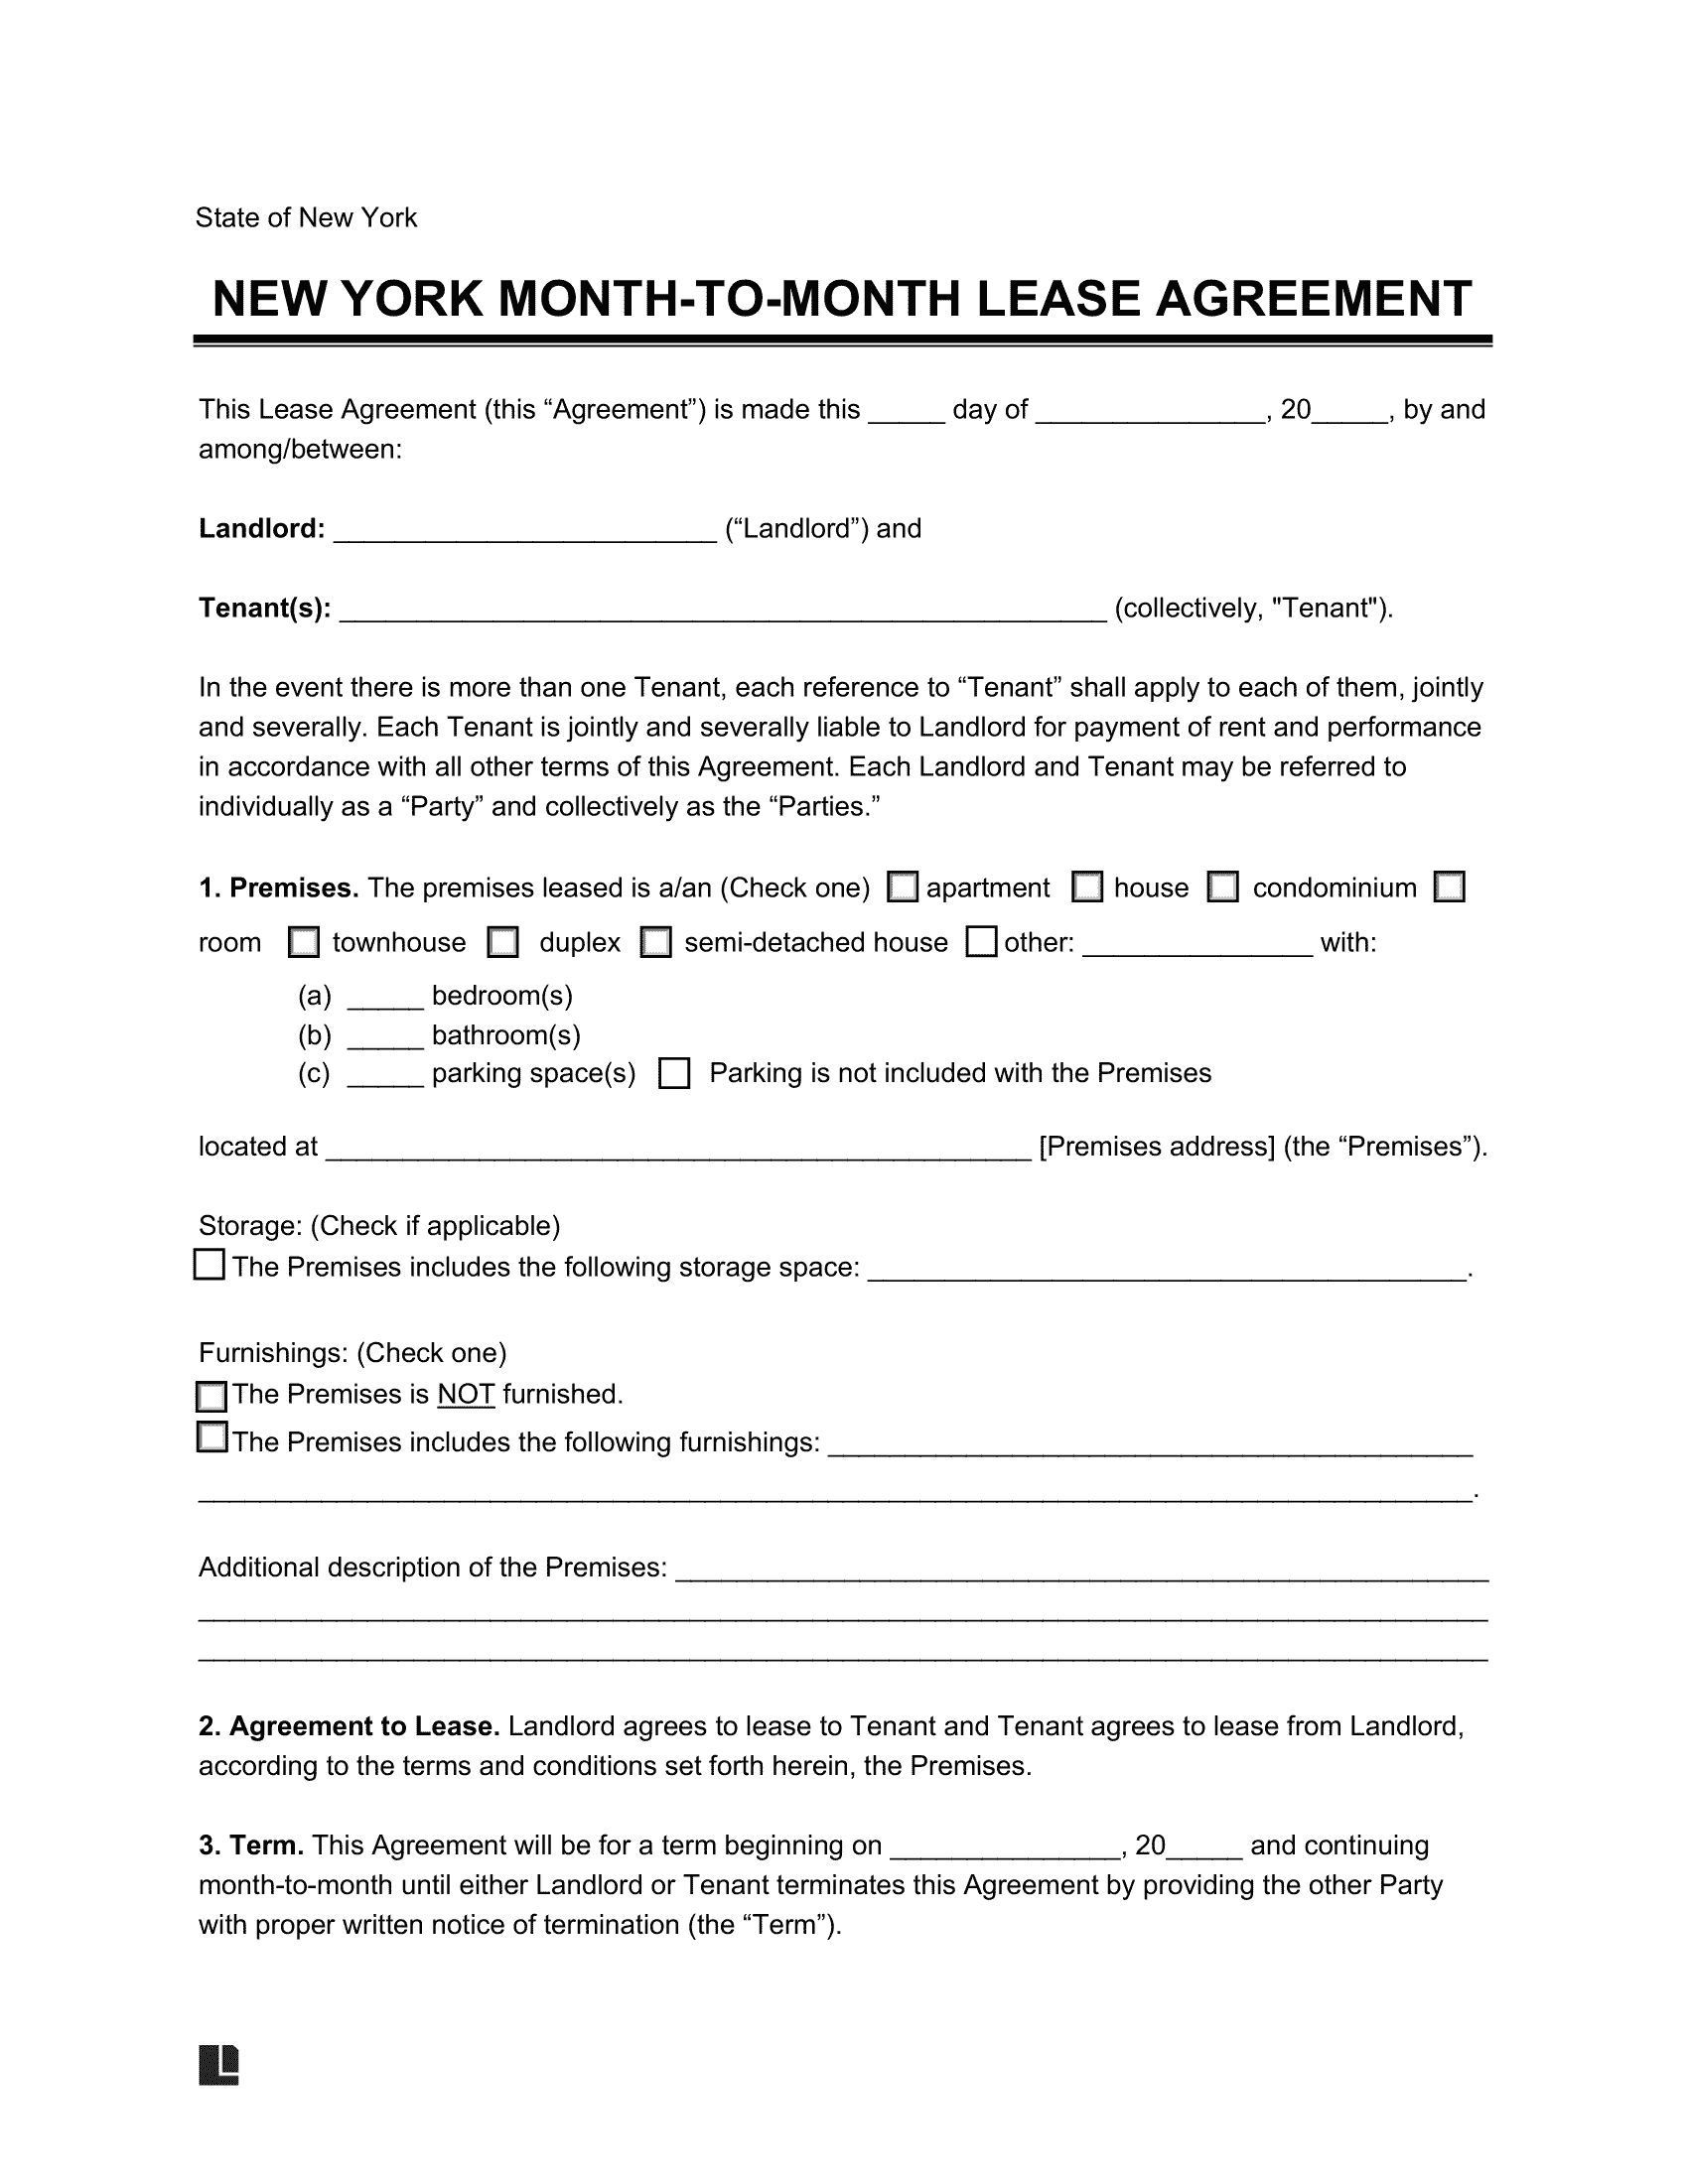 New York Month-to-Month Rental Agreement